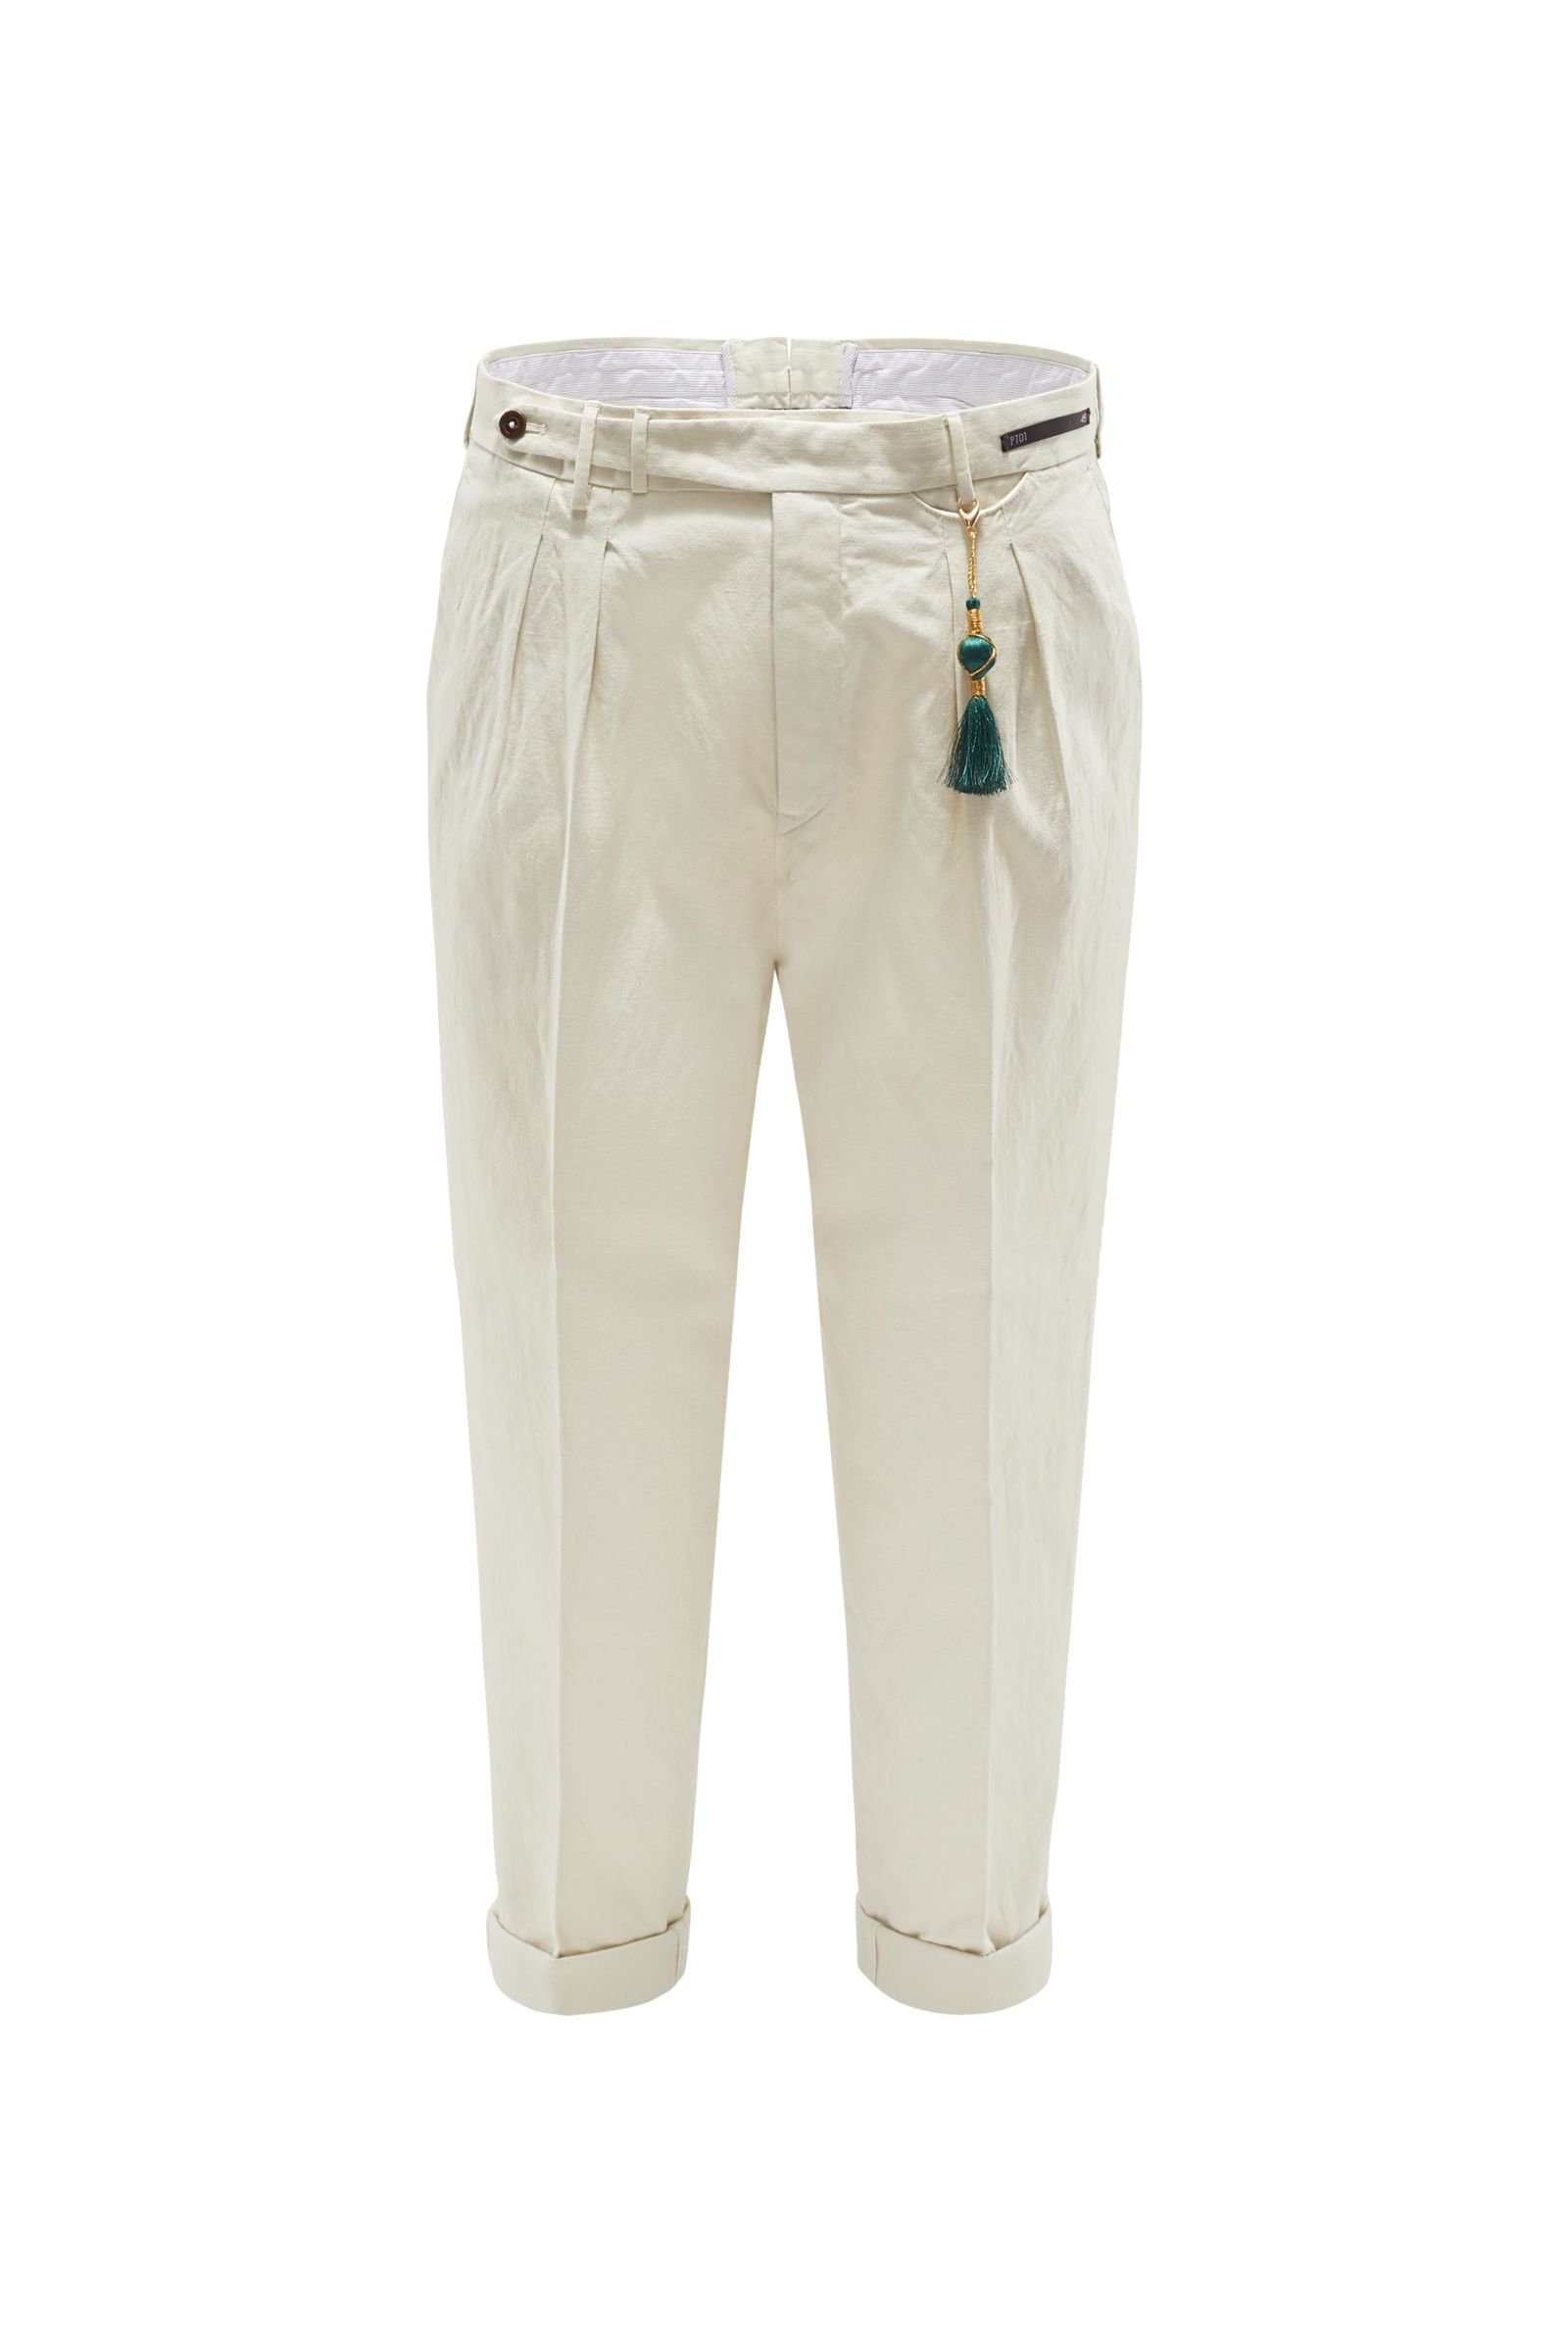 Chambray-Hose 'Colonial Party Bombay Hills Carrot Fit' beige